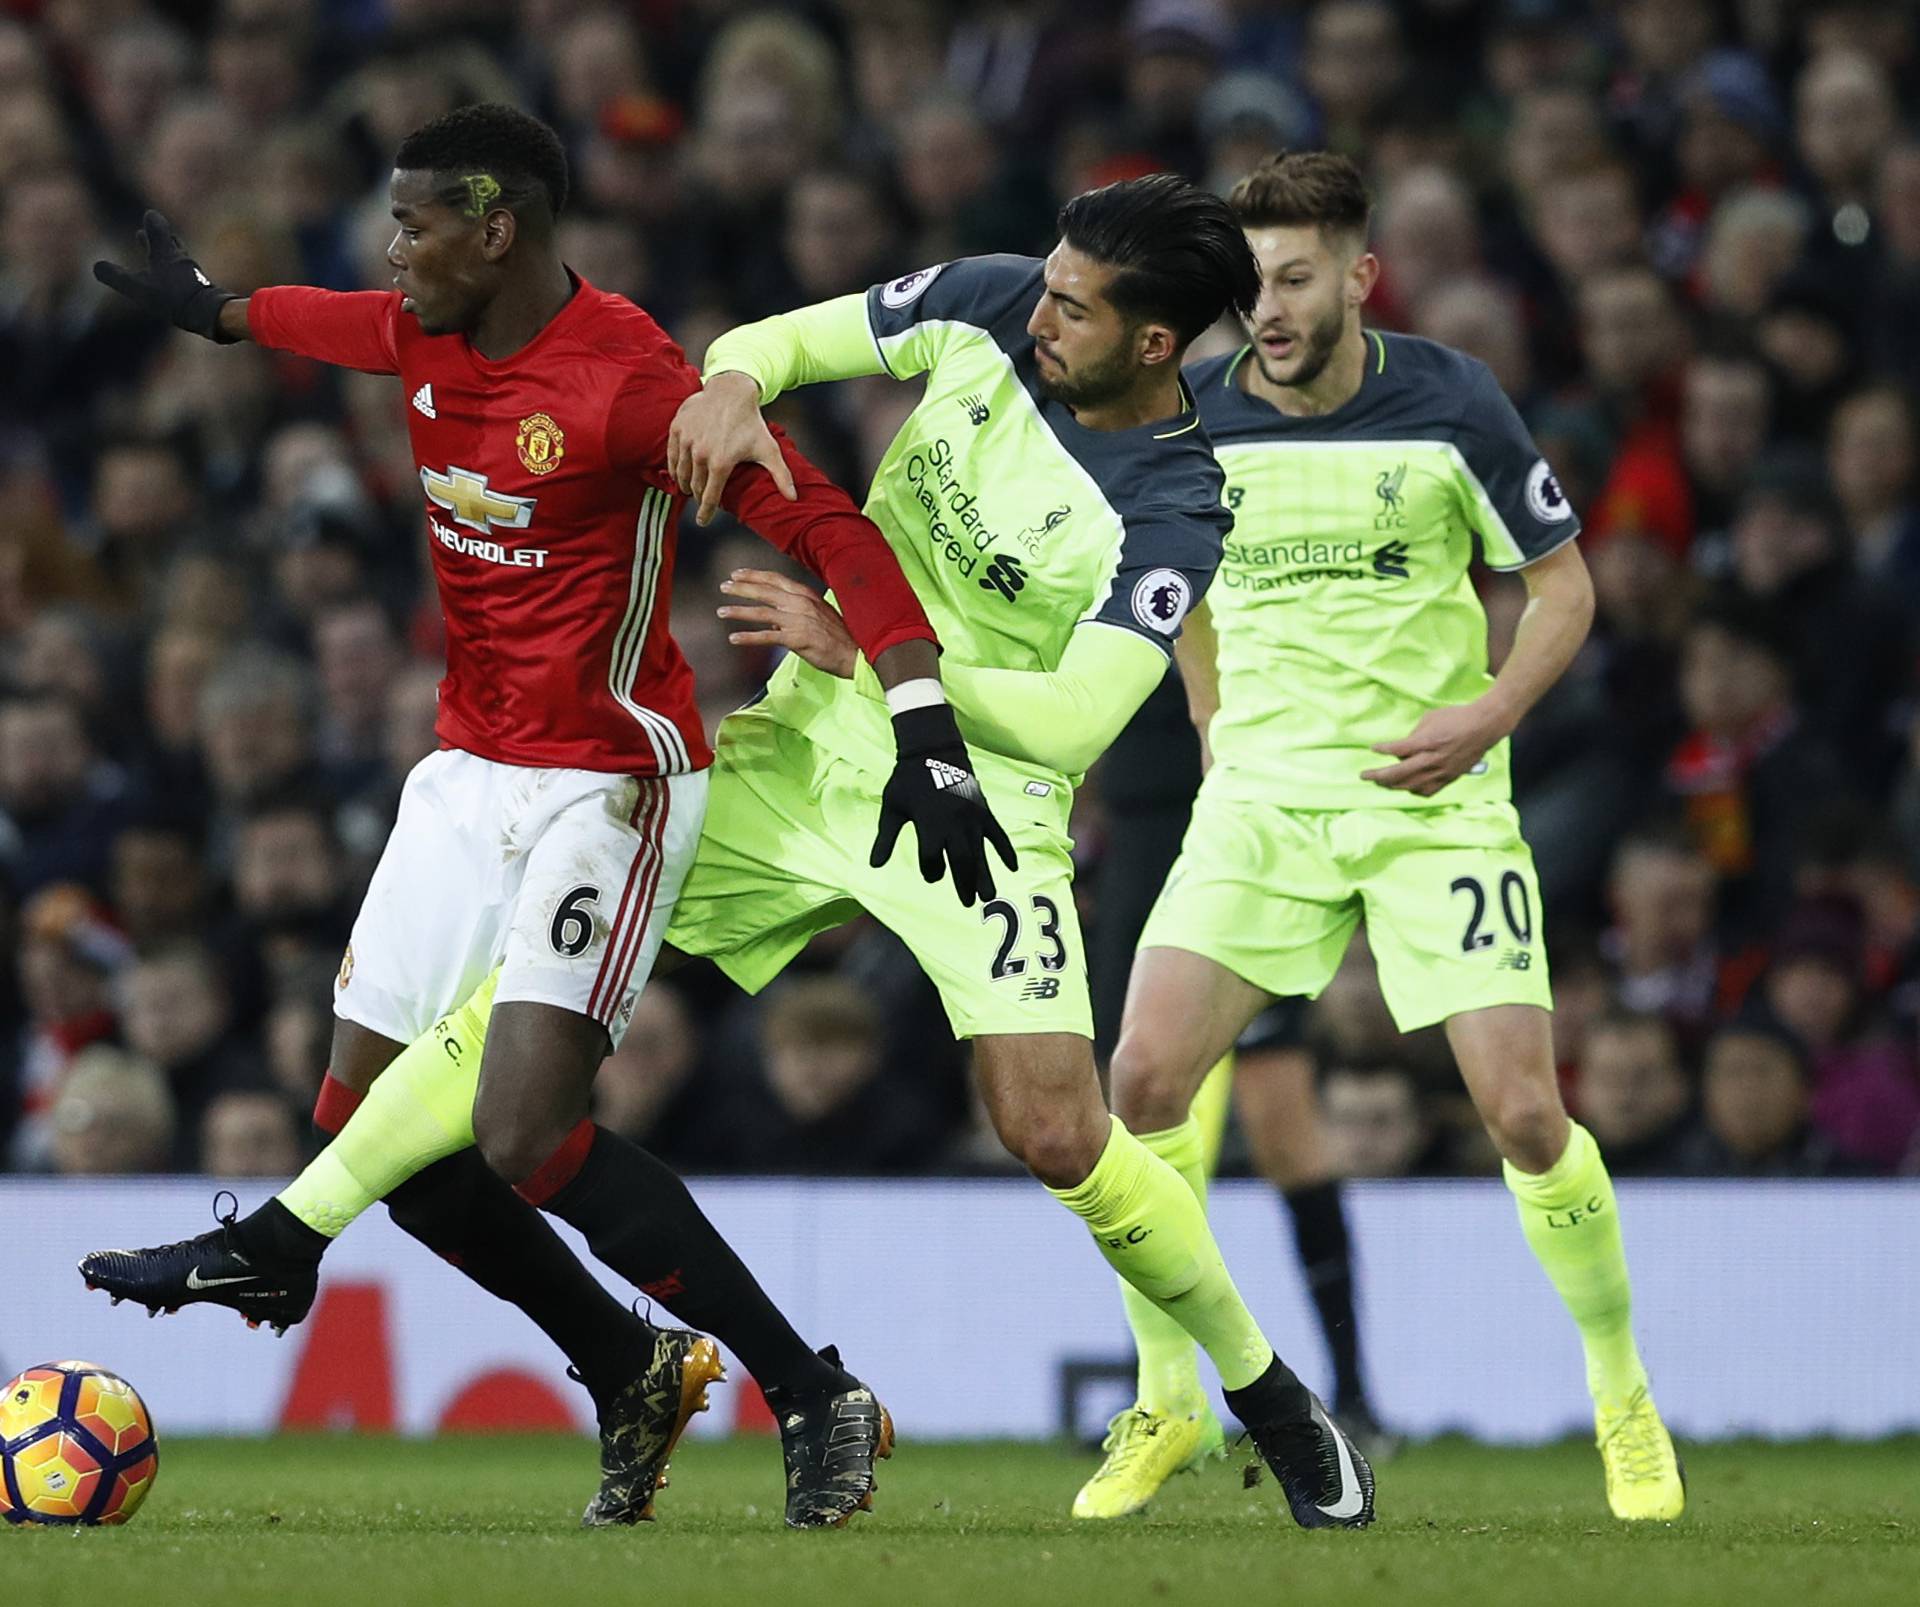 Manchester United's Paul Pogba in action with Liverpool's Emre Can and Adam Lallana